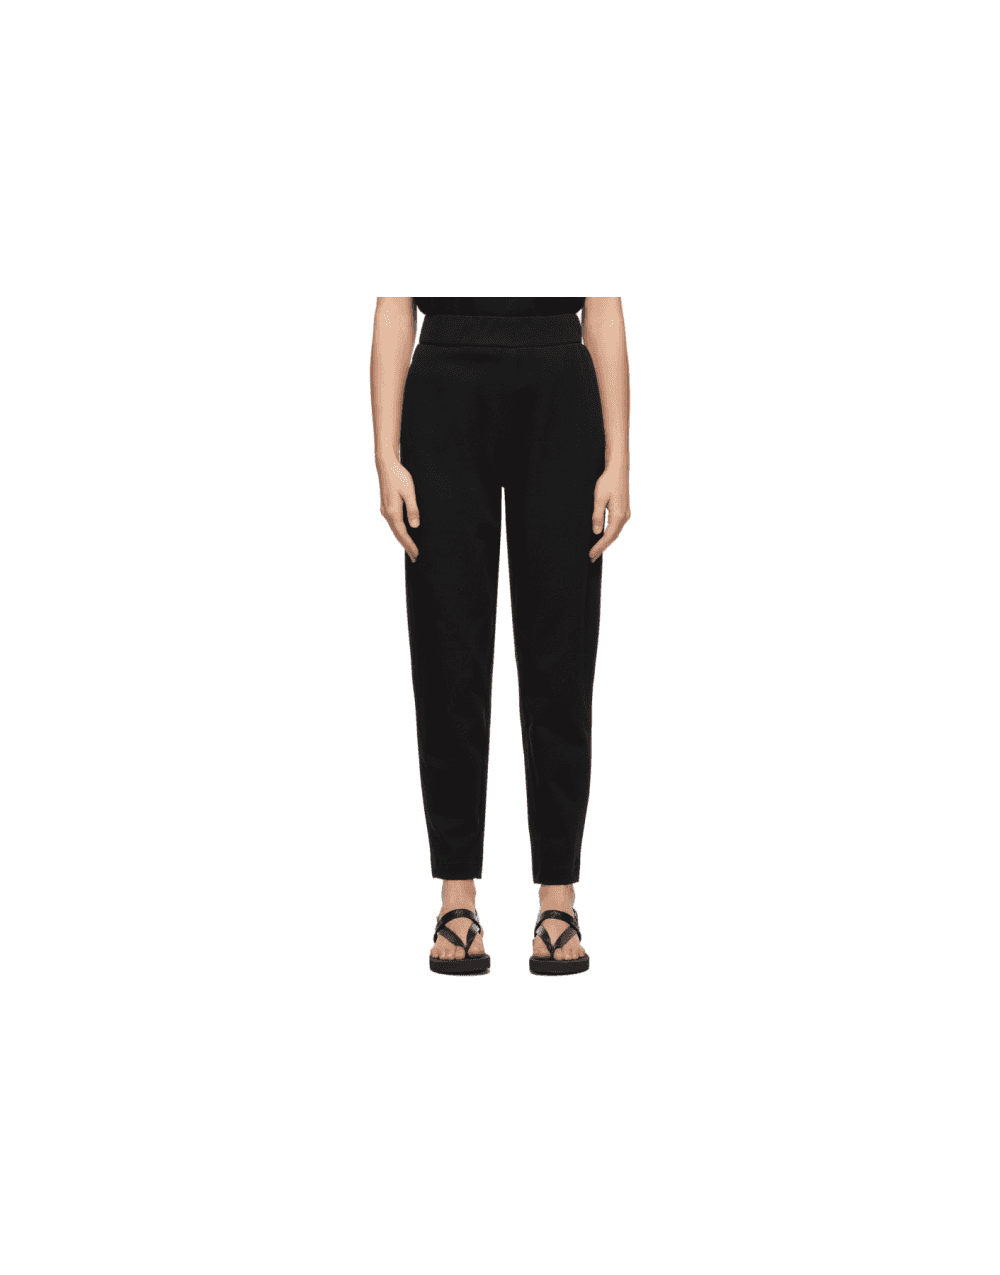 Max Mara Leisure Navy Pesca Jersey Trousers